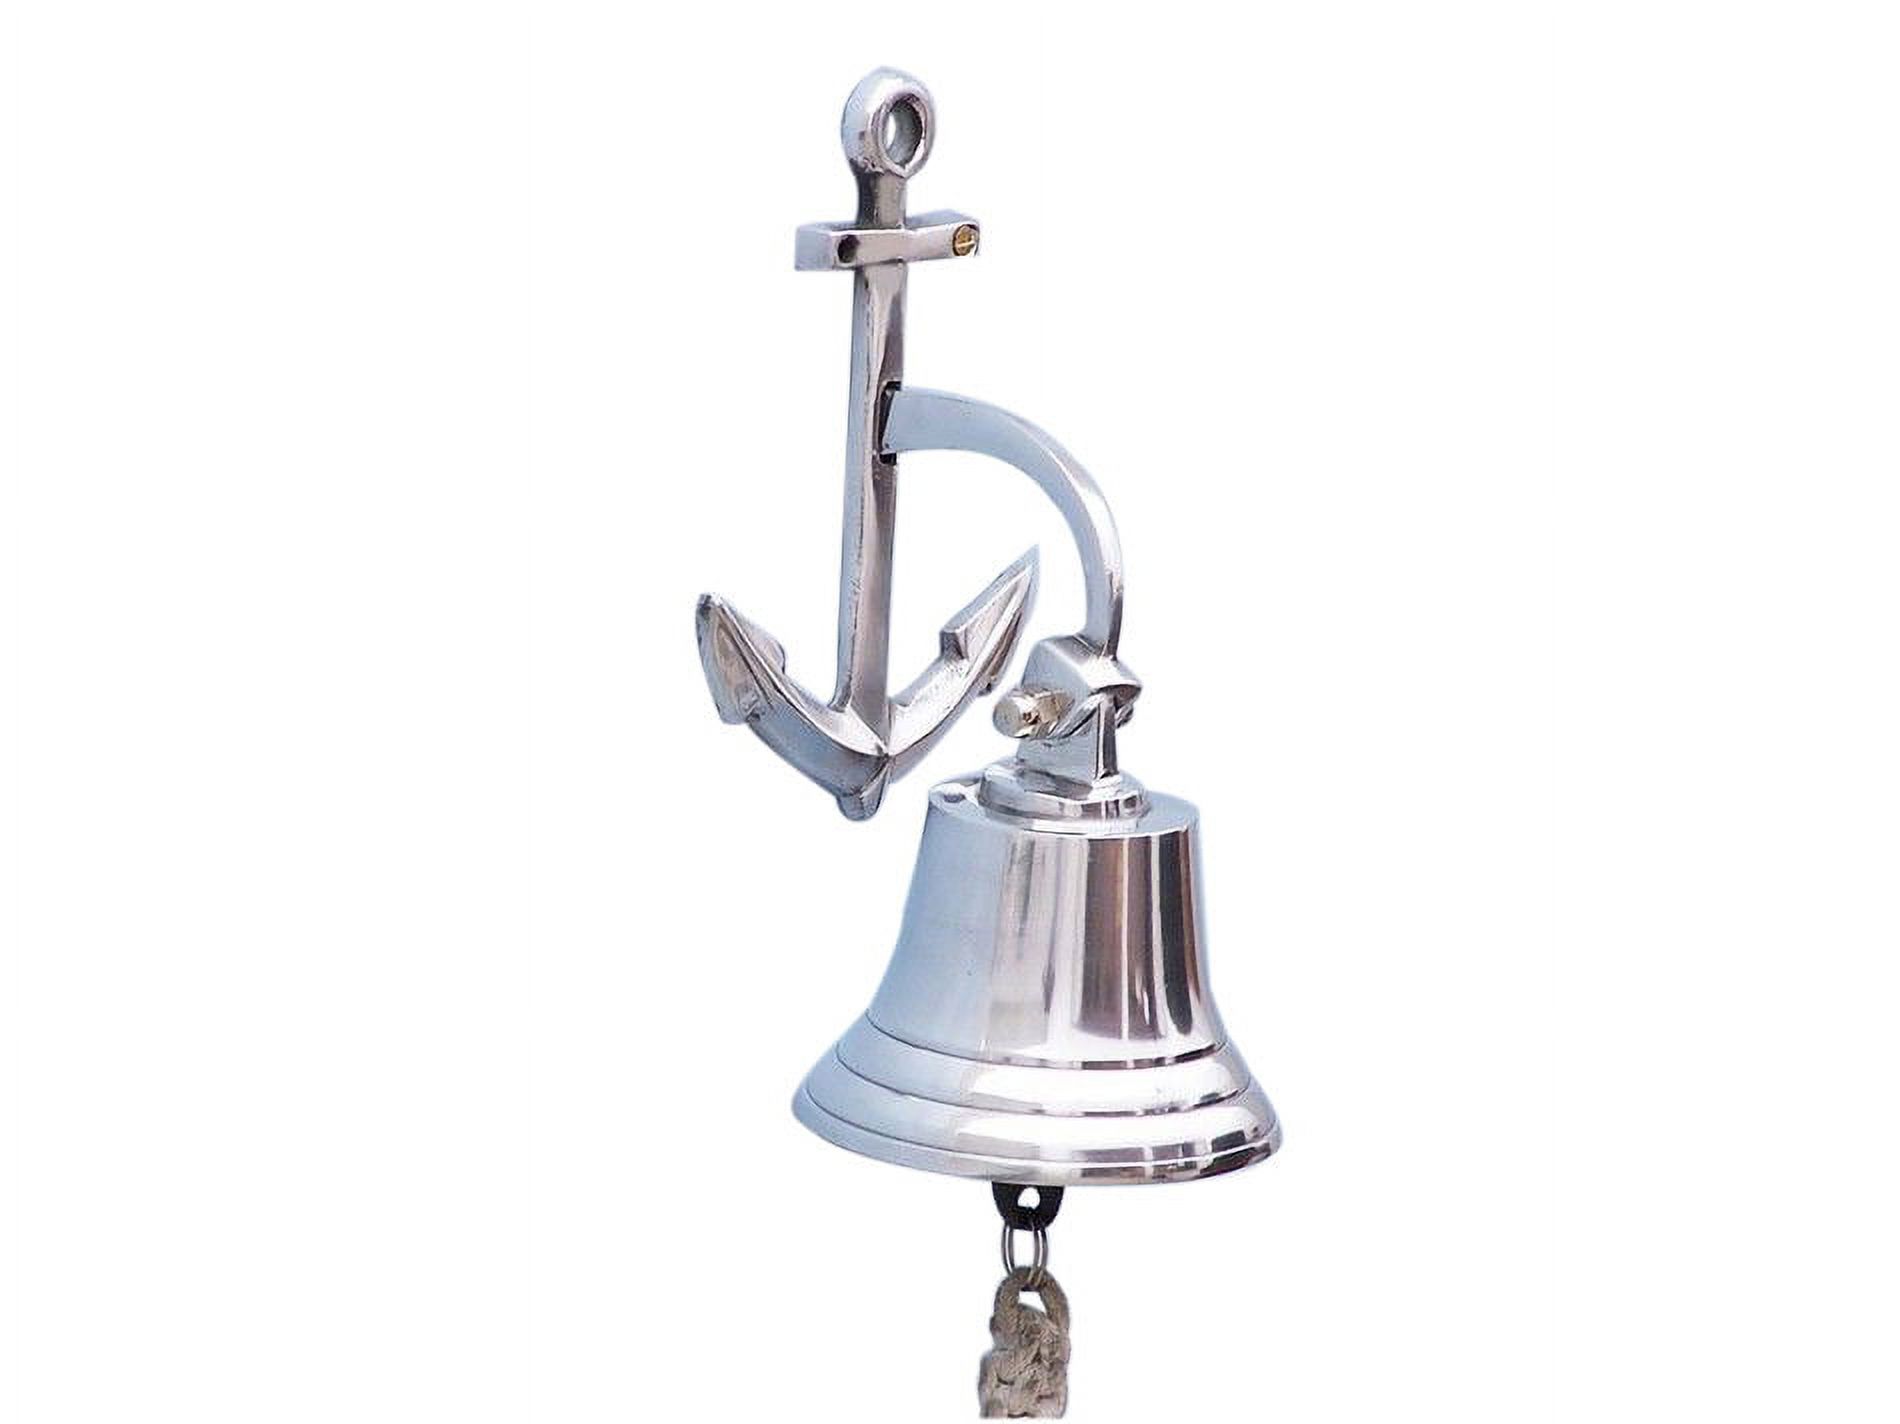 Anchor Chrome Bell 4" - Chrome Hanging Bell - Nautical Bell - Decorative Chrome Bell - Anchor Decoration - Nautical Decoration - image 1 of 2